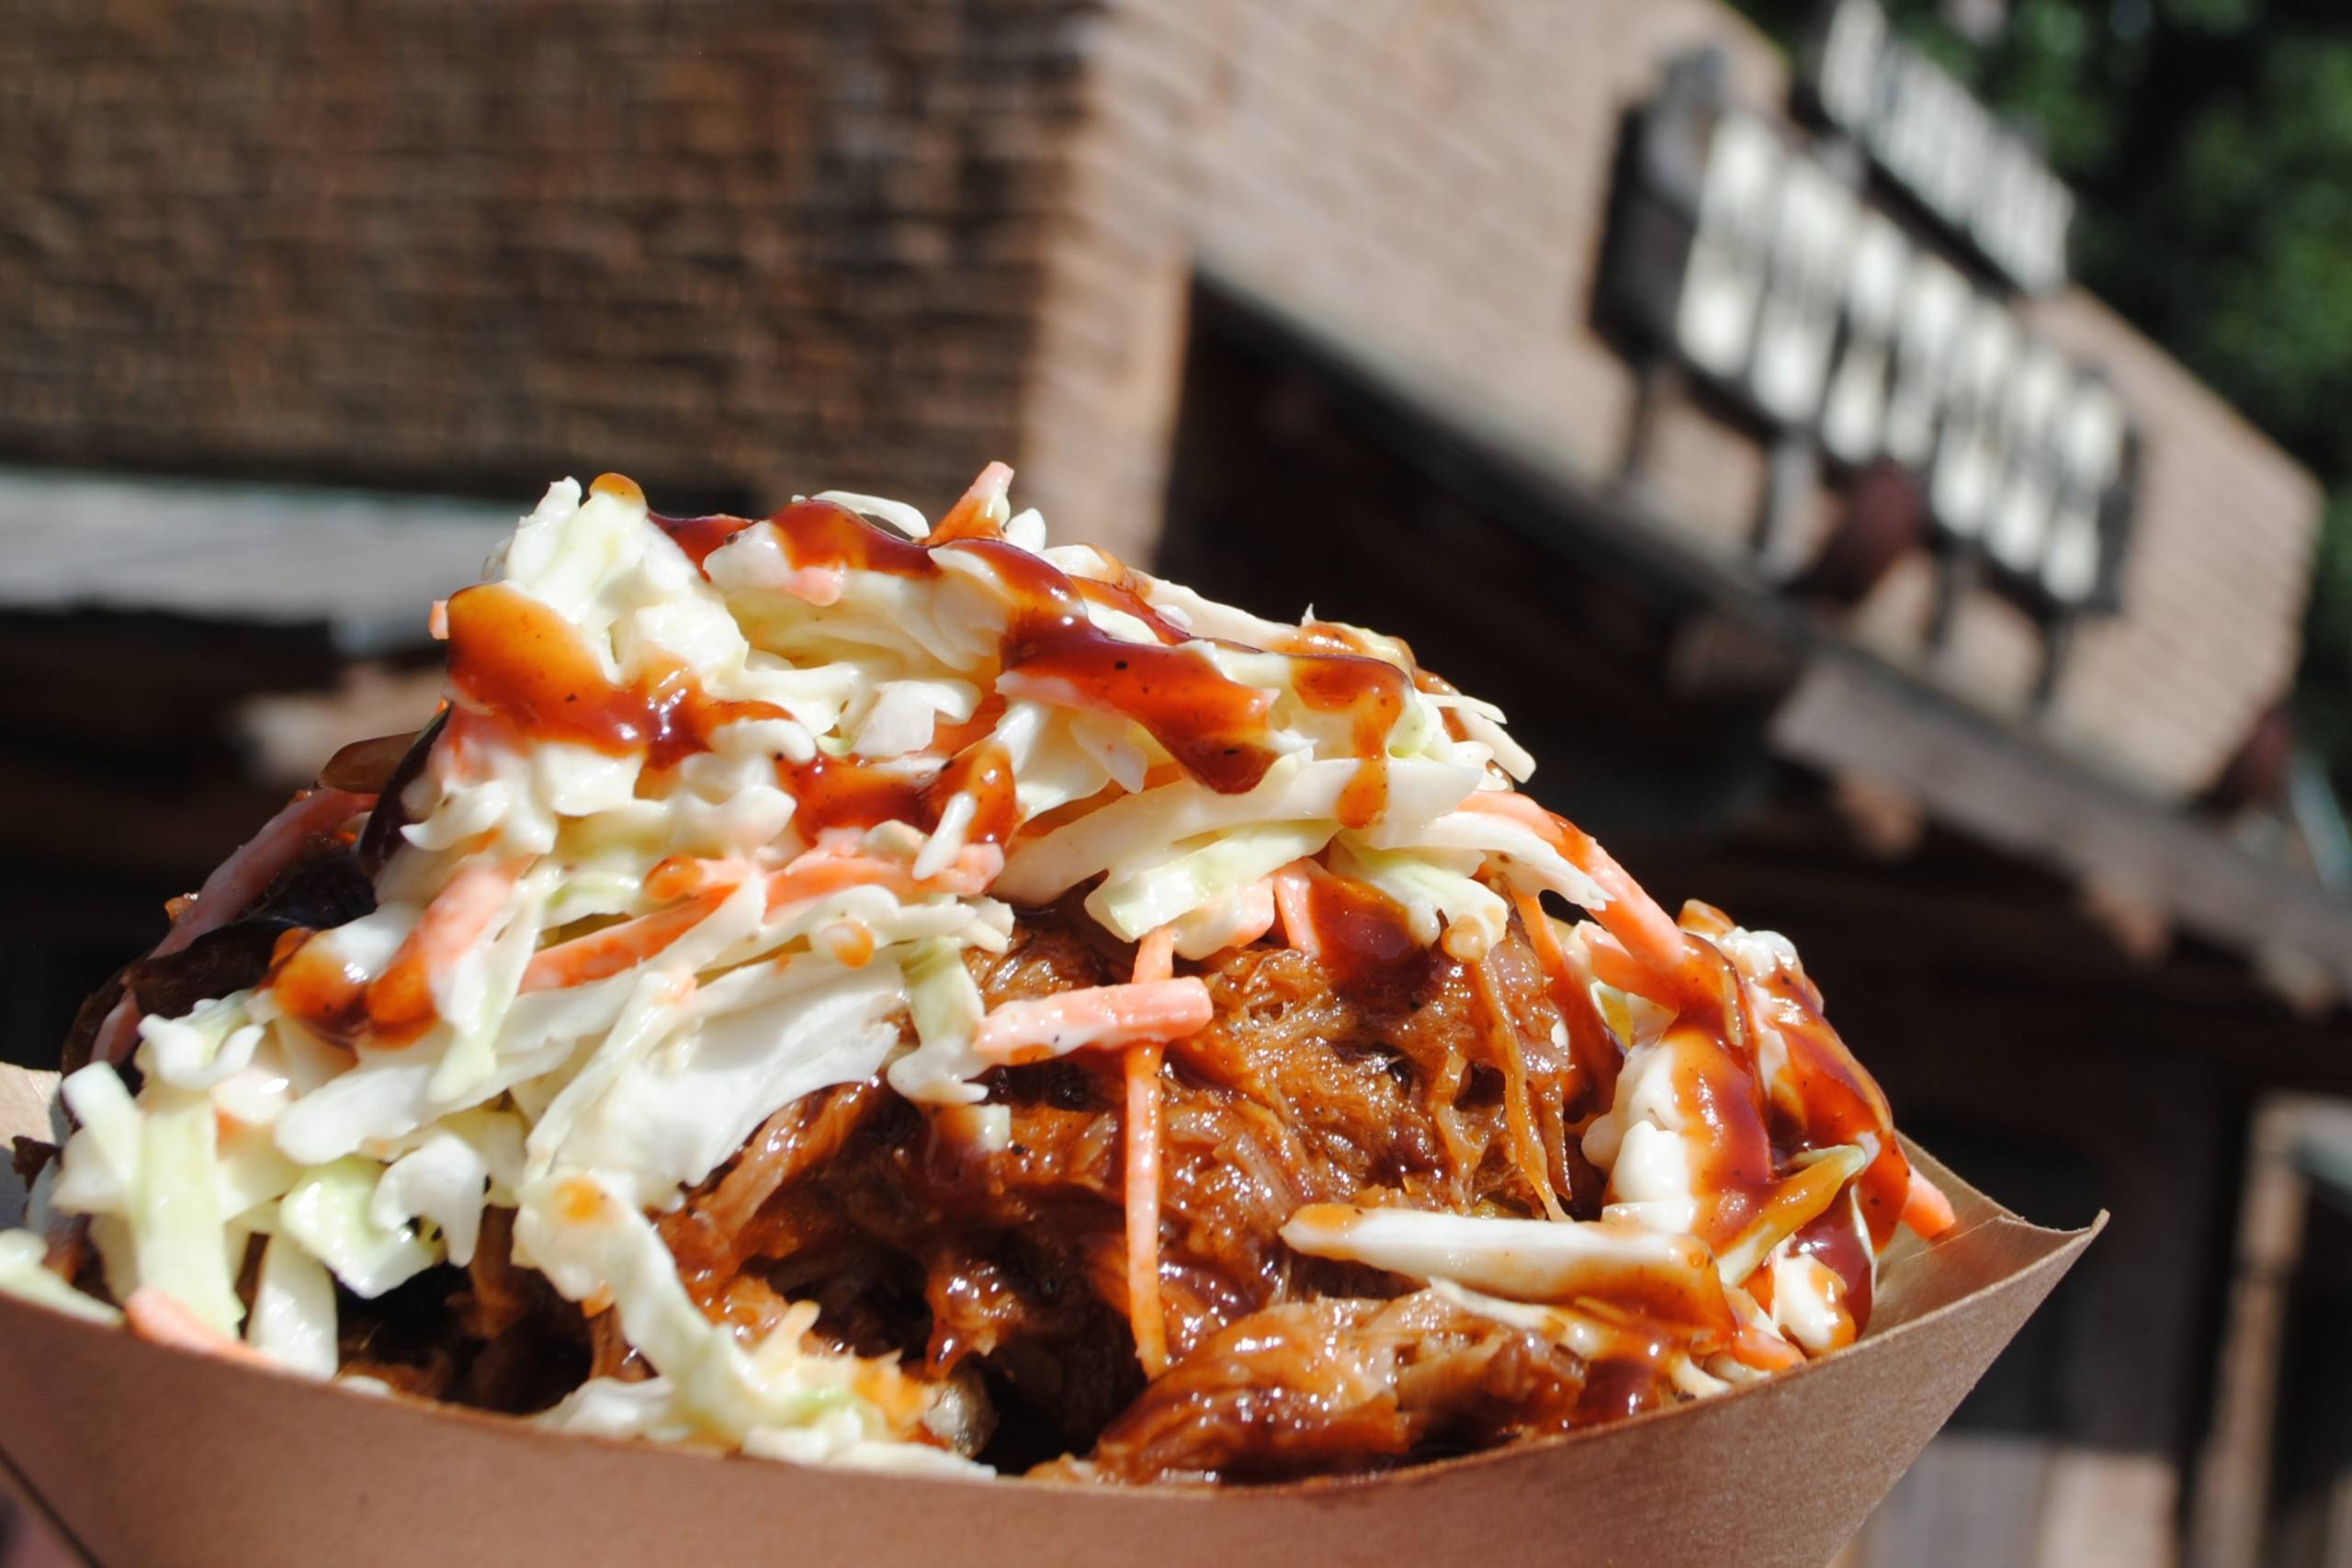 Barbecue Pork Waffle Fries topped with Barbecue Pork and Coleslaw